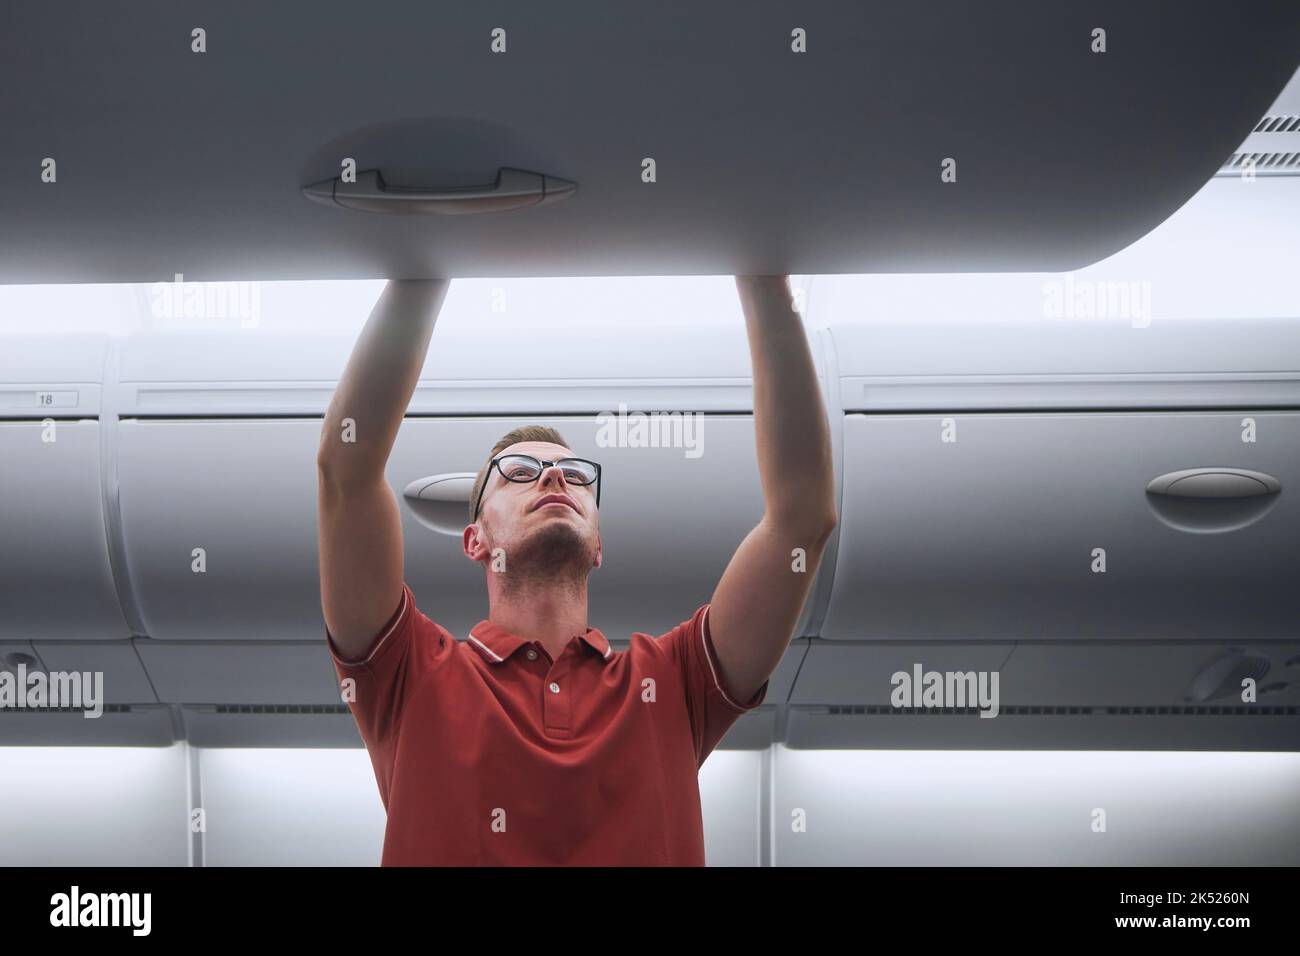 Man travel by airplane. Passenger putting hand baggage in lockers above seats of plane. Stock Photo